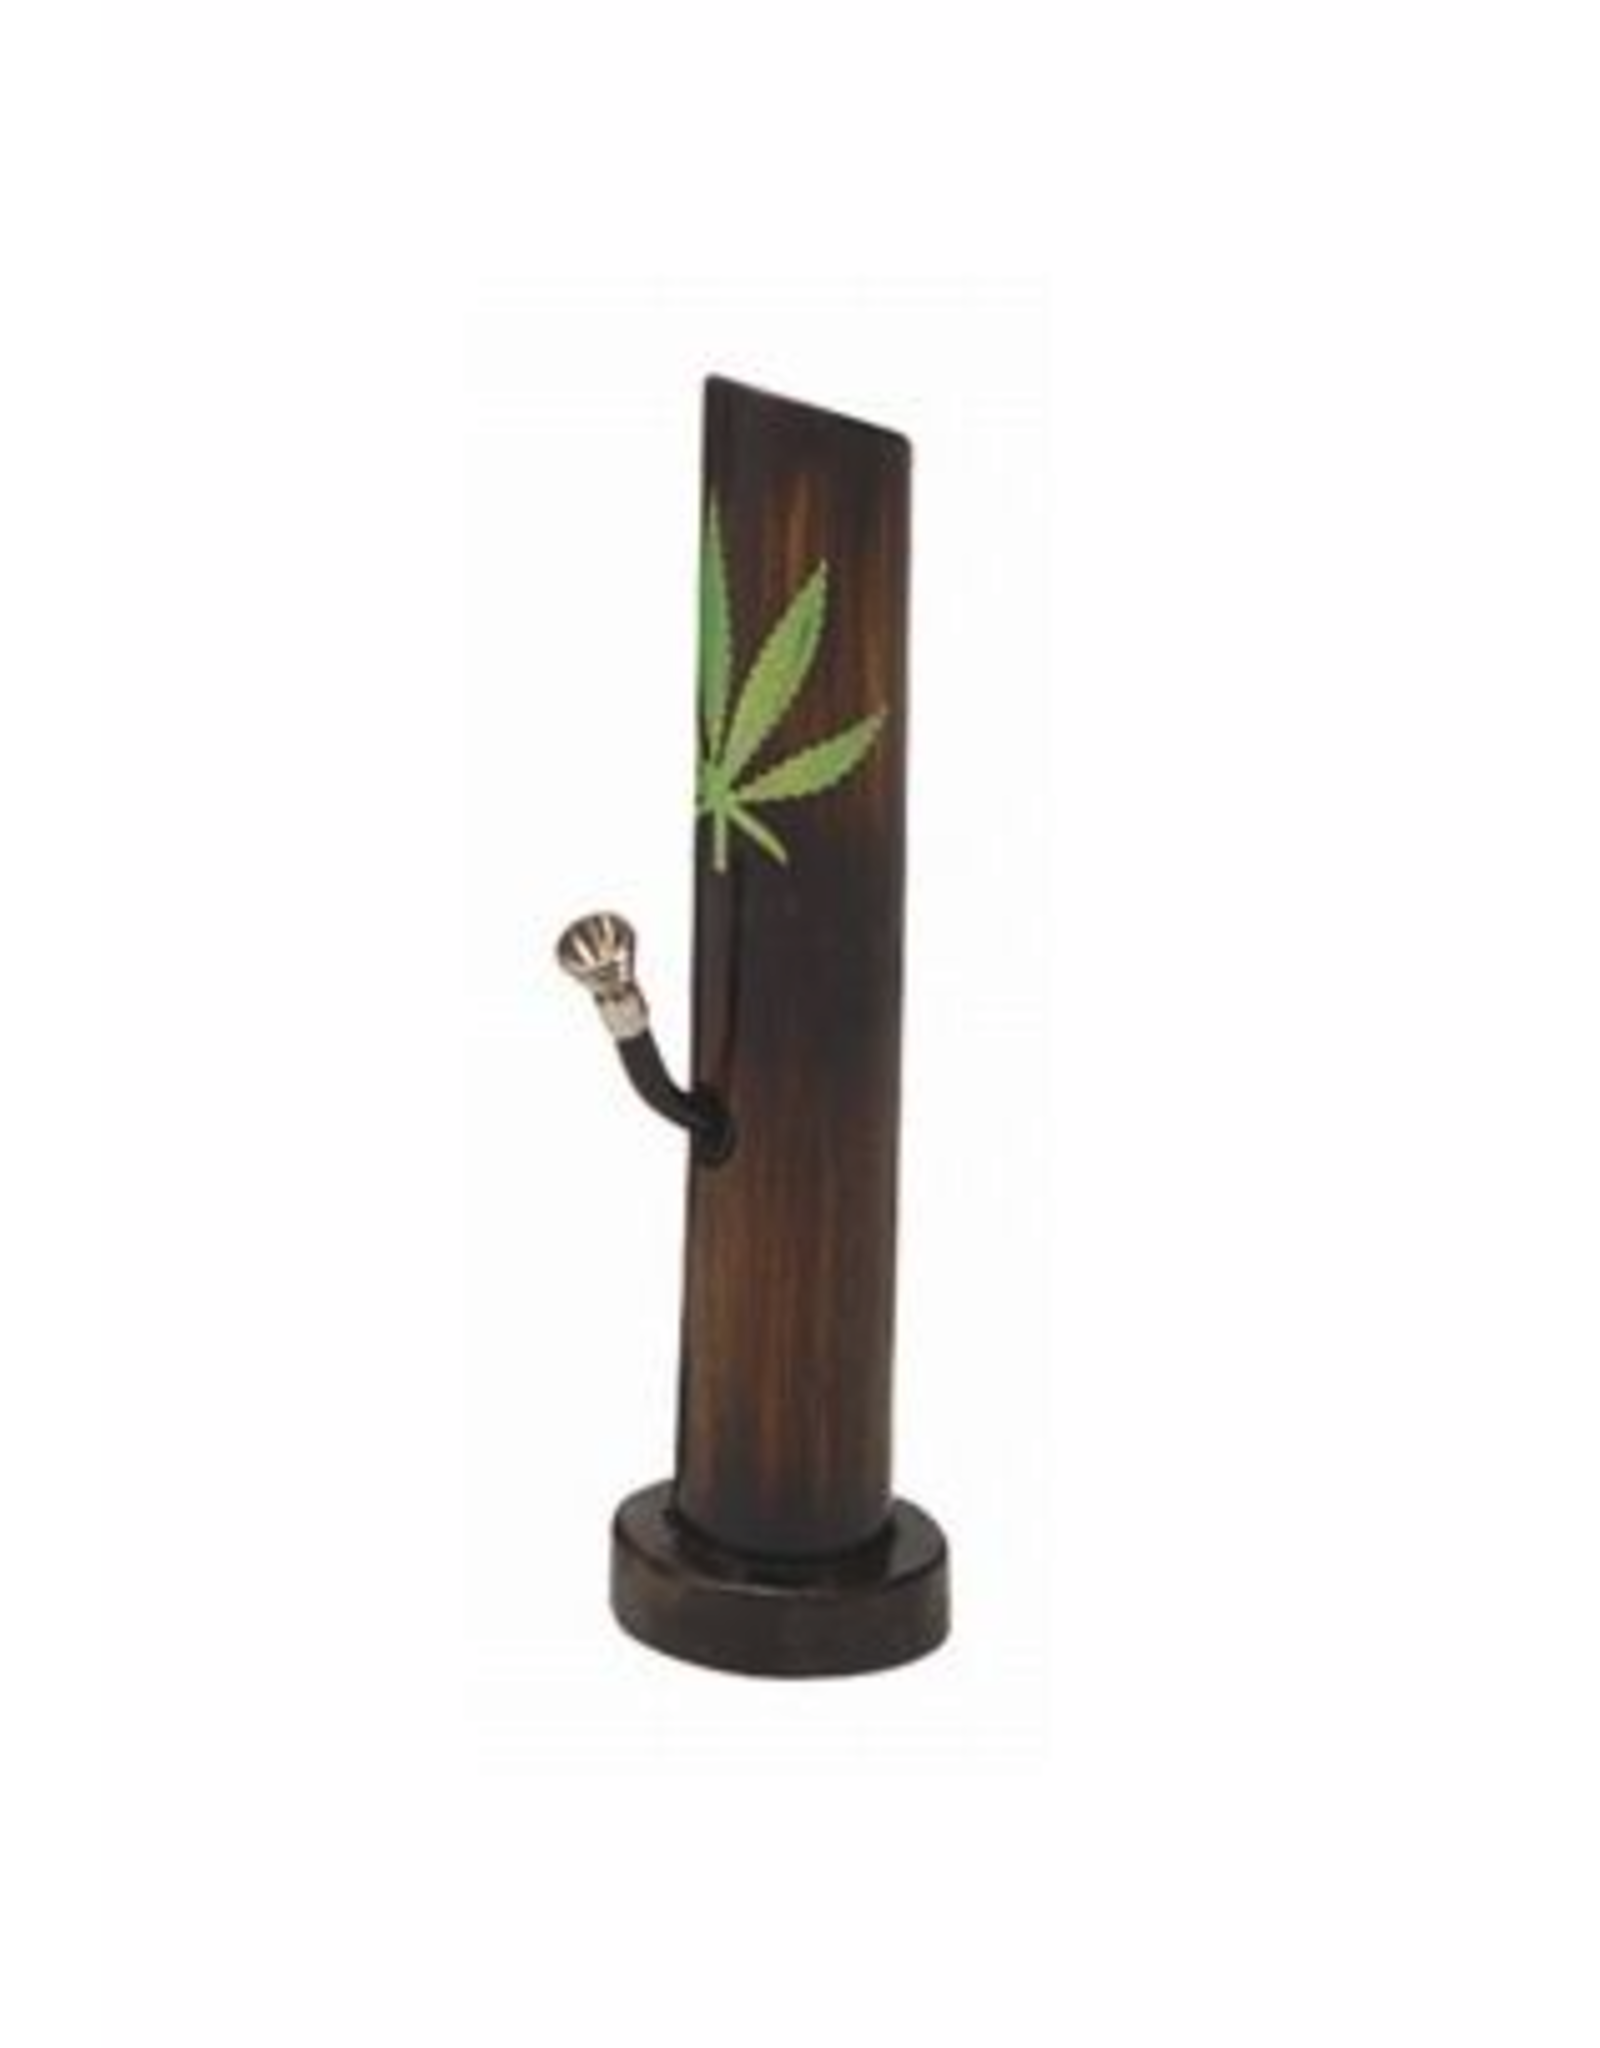 Bamboo Bong with leaf 29 cm